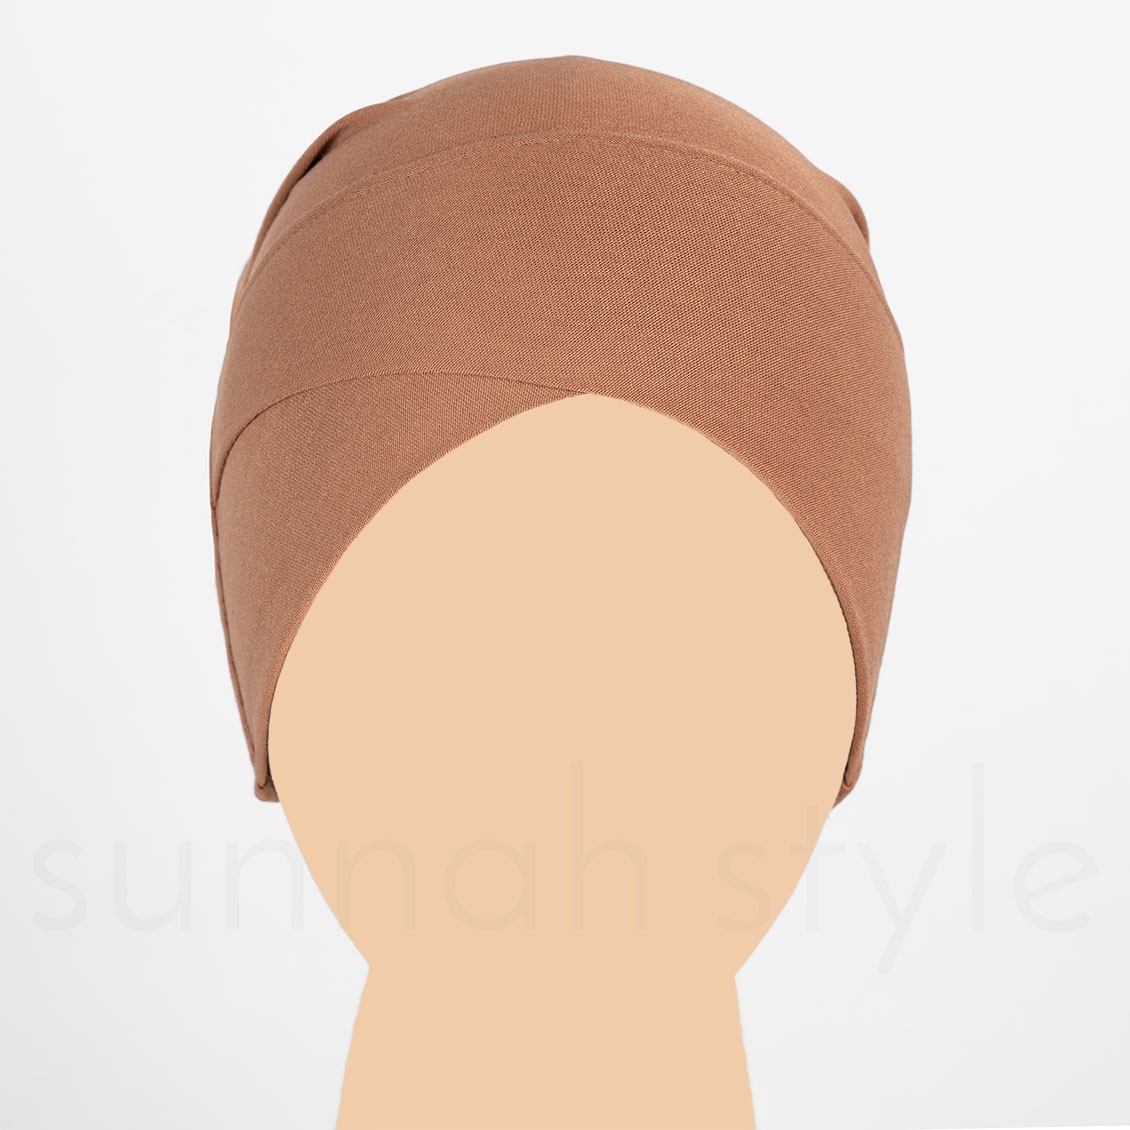 Sunnah Style Crossover Tube Underscarf Brown Hijab Cap